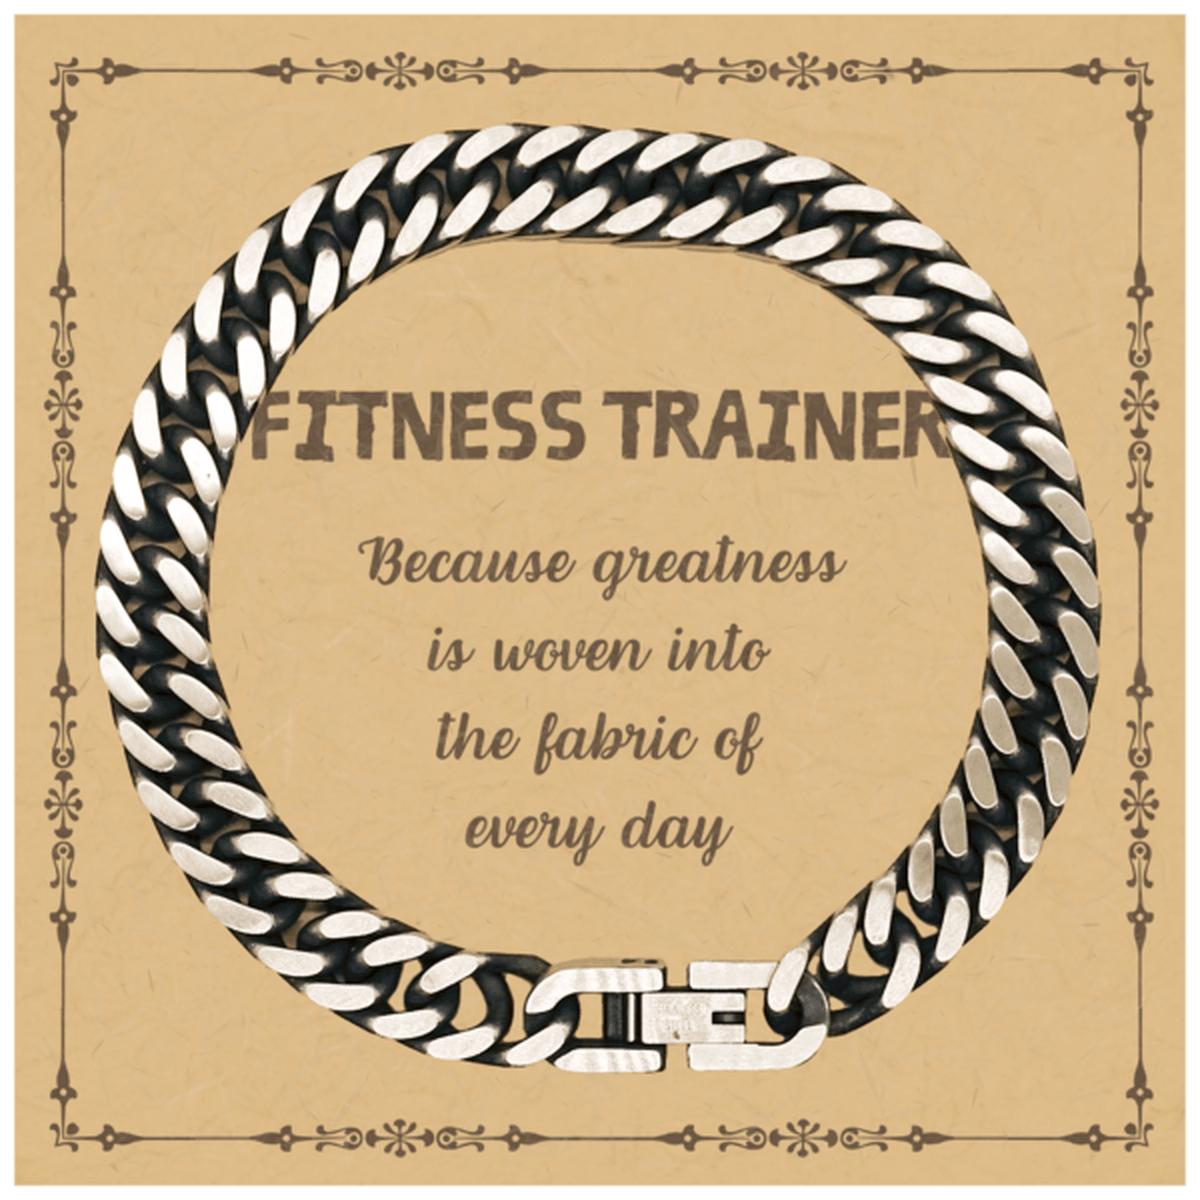 Sarcastic Fitness Trainer Cuban Link Chain Bracelet Gifts, Christmas Holiday Gifts for Fitness Trainer Birthday Message Card, Fitness Trainer: Because greatness is woven into the fabric of every day, Coworkers, Friends - Mallard Moon Gift Shop